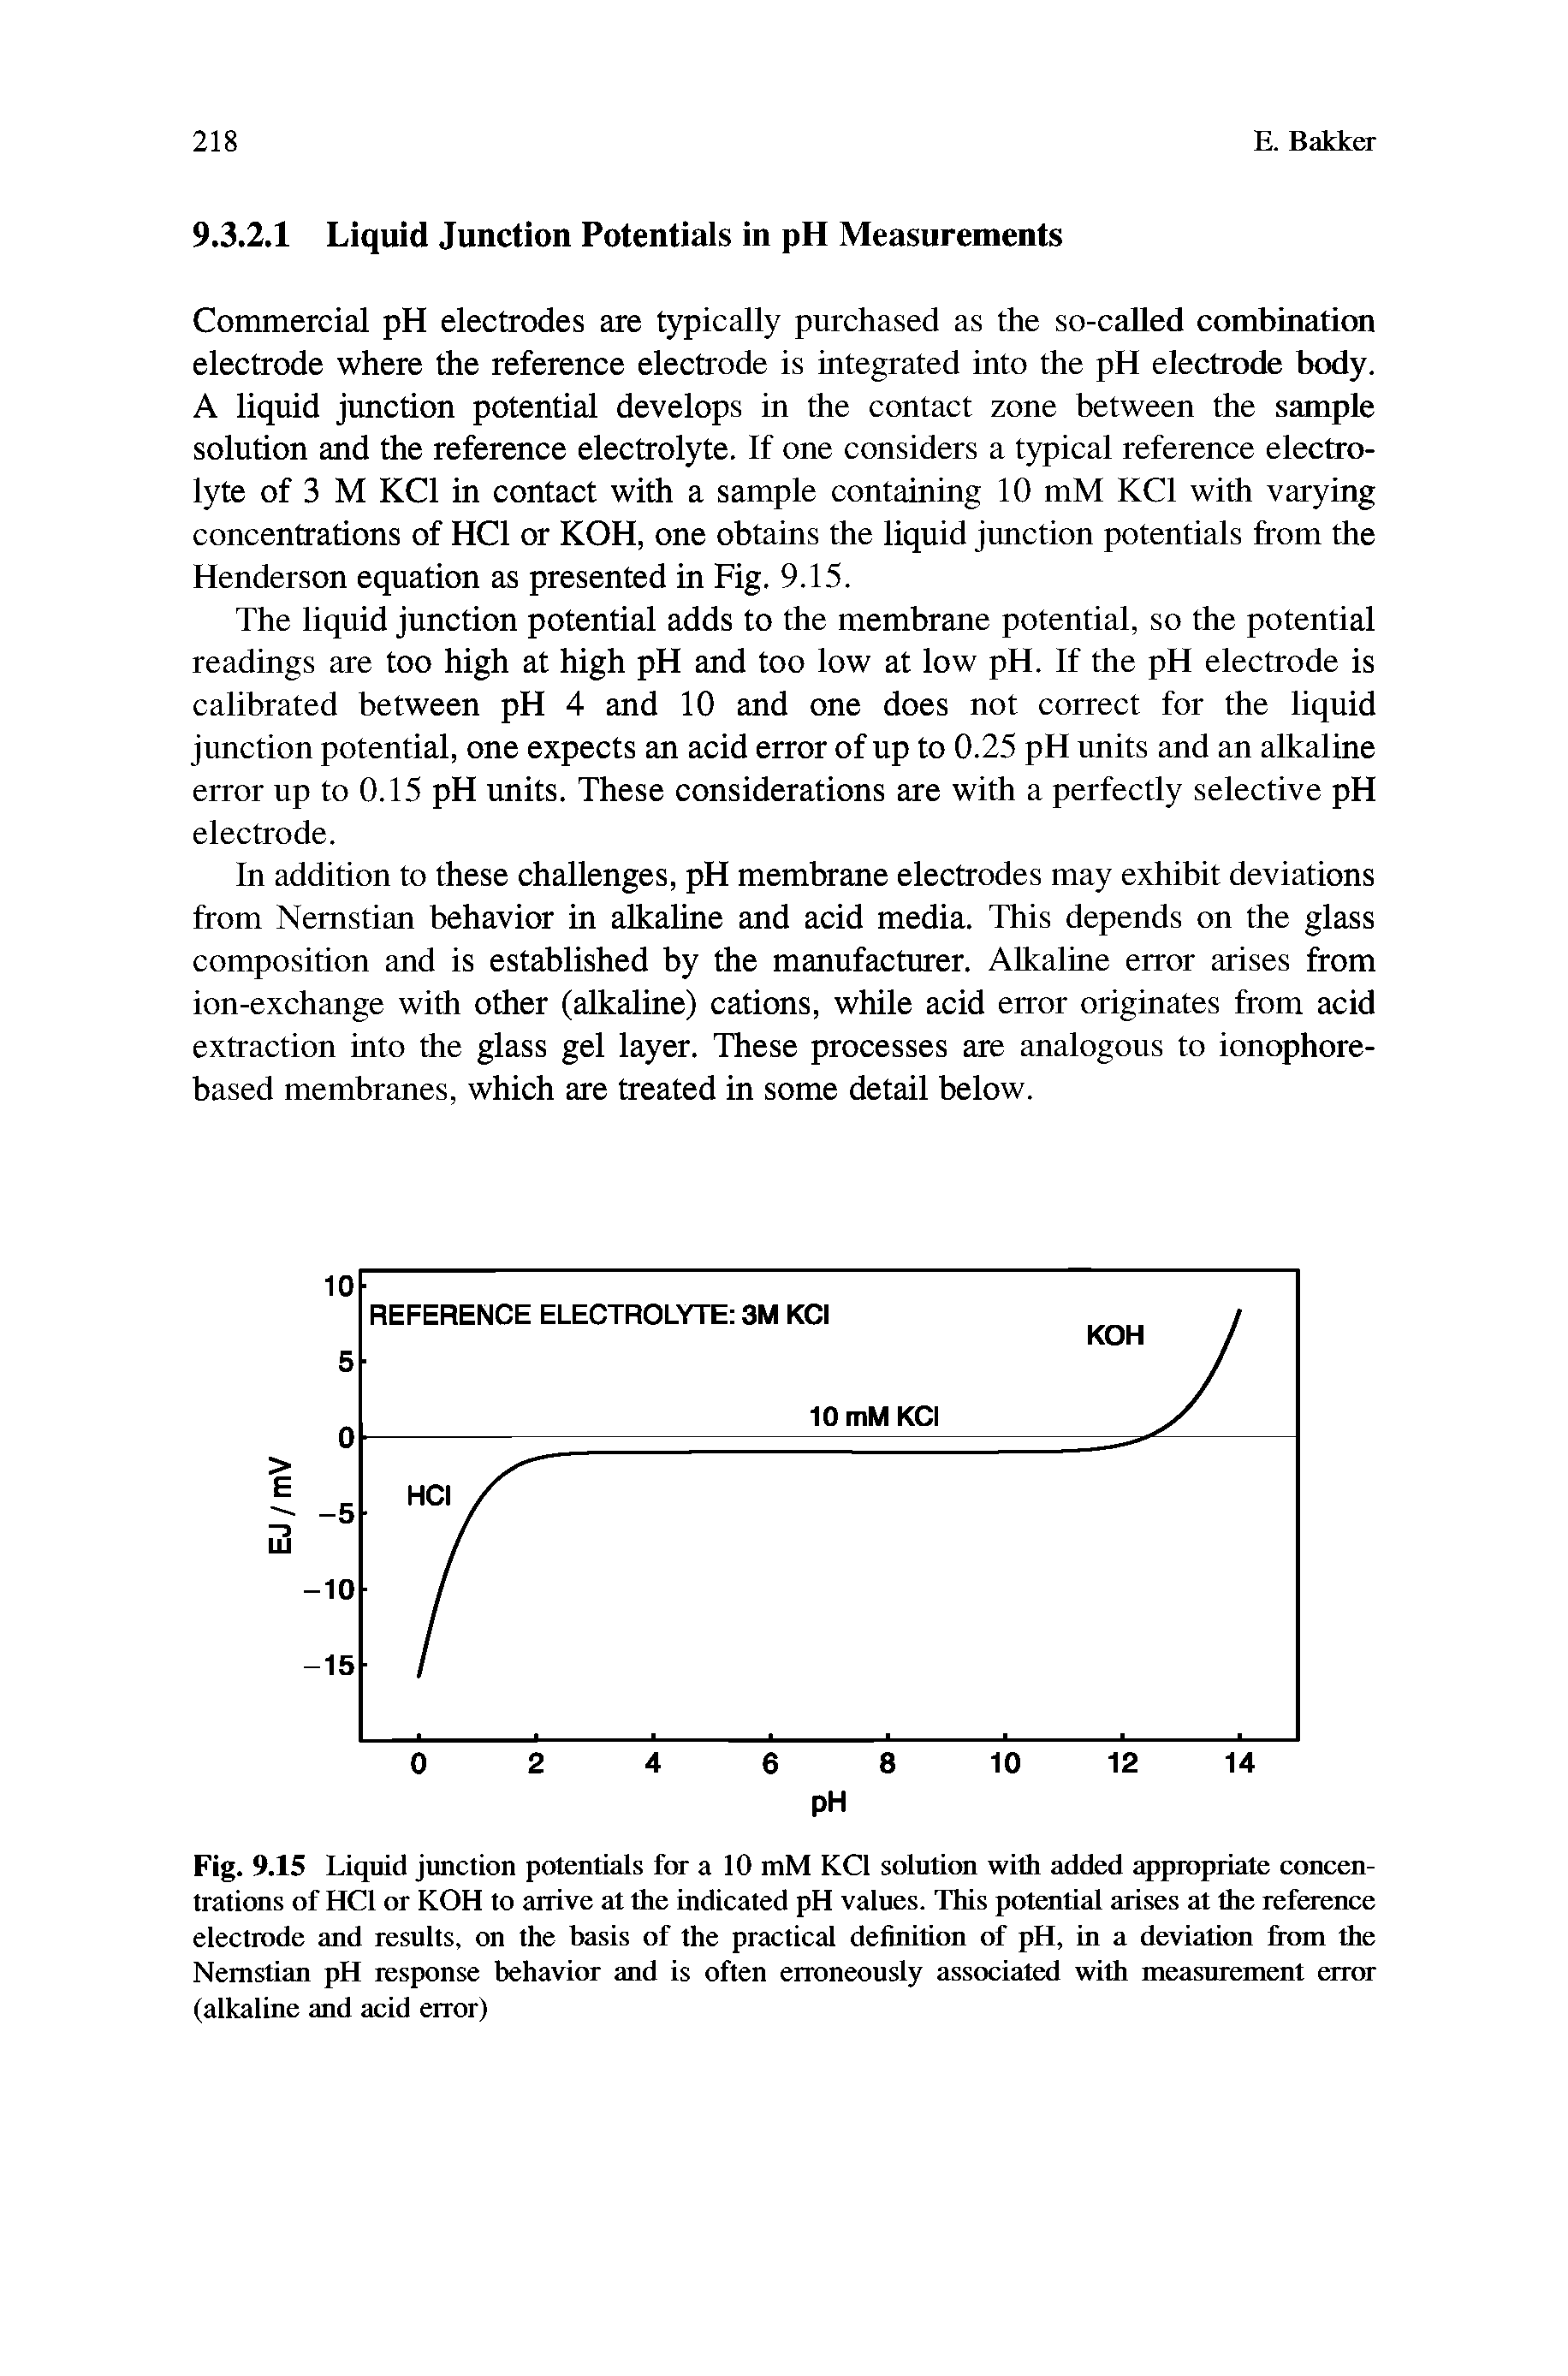 Fig. 9.15 Liquid Jimction potentials fiw a 10 mM KCl solutirai with added appropriate concentrations of HCl or KOH to arrive at the indicated pH values. This potmtial arises at the reference electrode and results, on the basis of the practical definition of pH, in a deviation from the Nemstian pH response behavior and is often erroneously associated with measurement error (alkaline and acid error)...